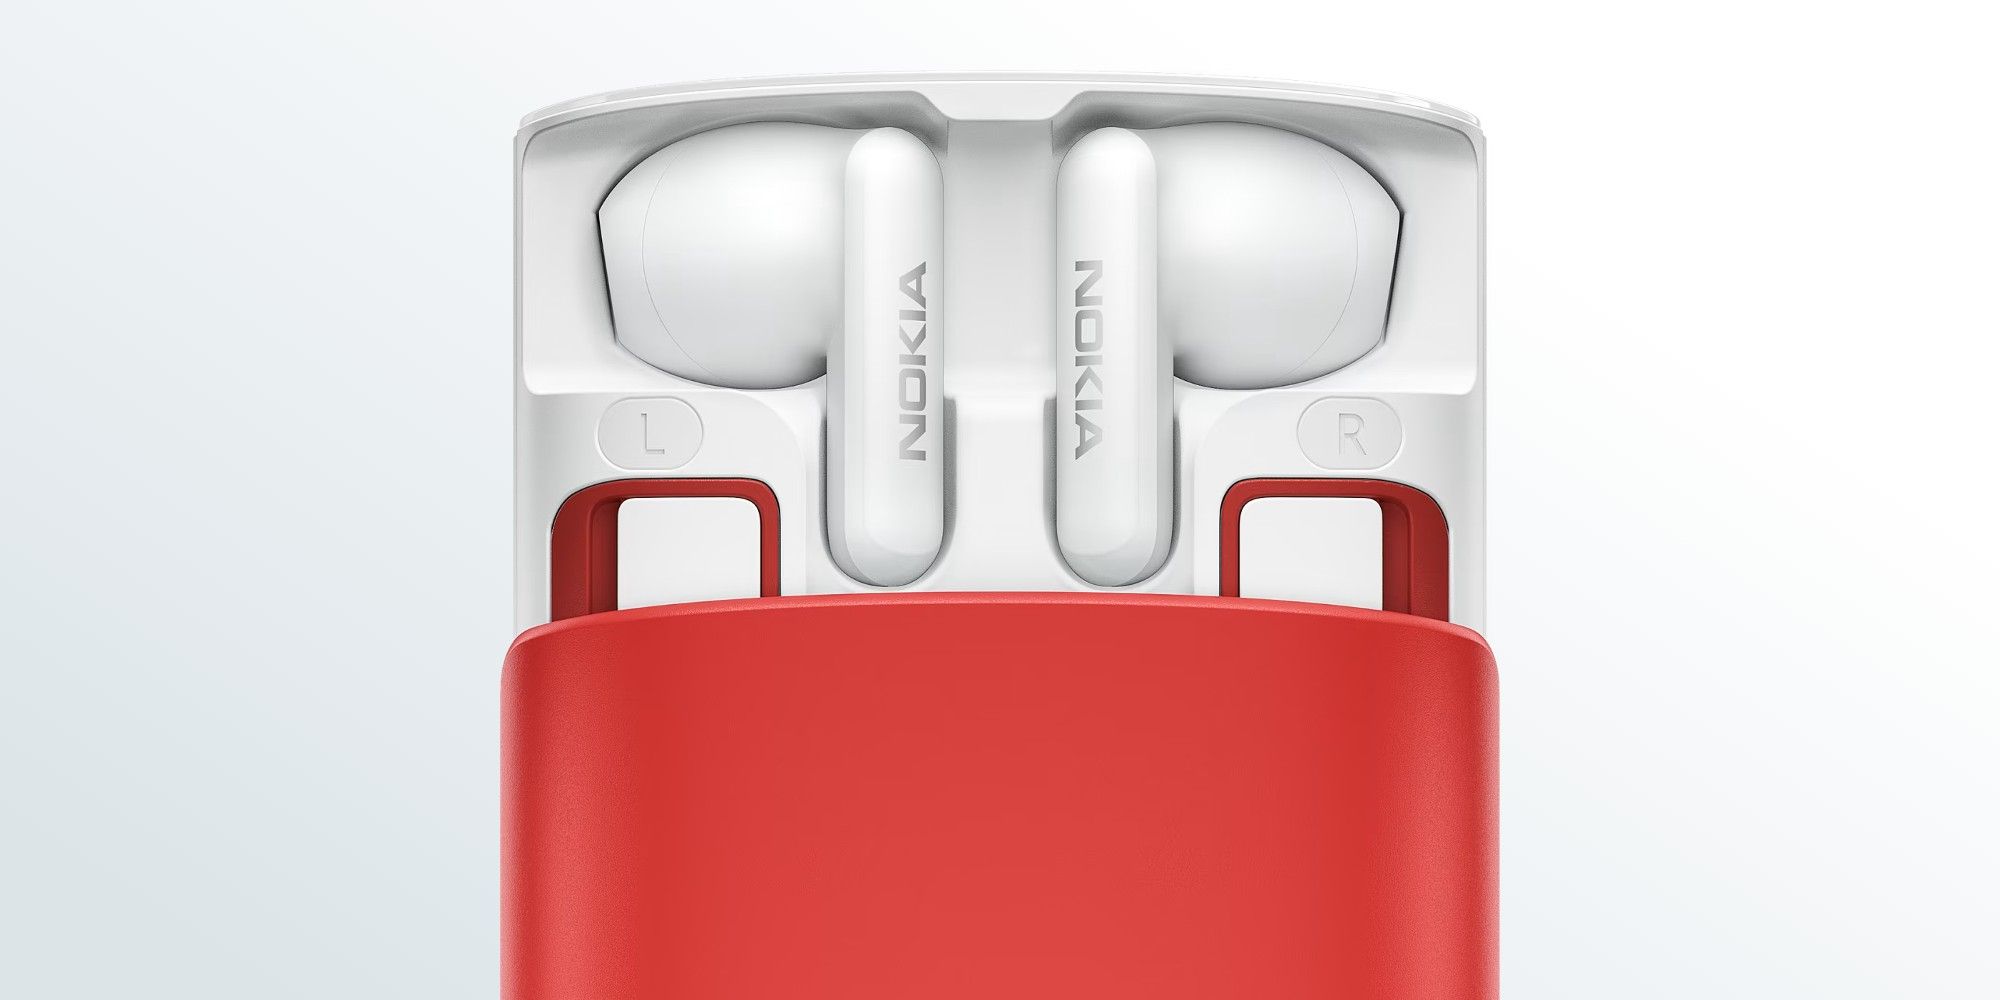 Nokia 5710 XpressAudio comes with built-in earbuds